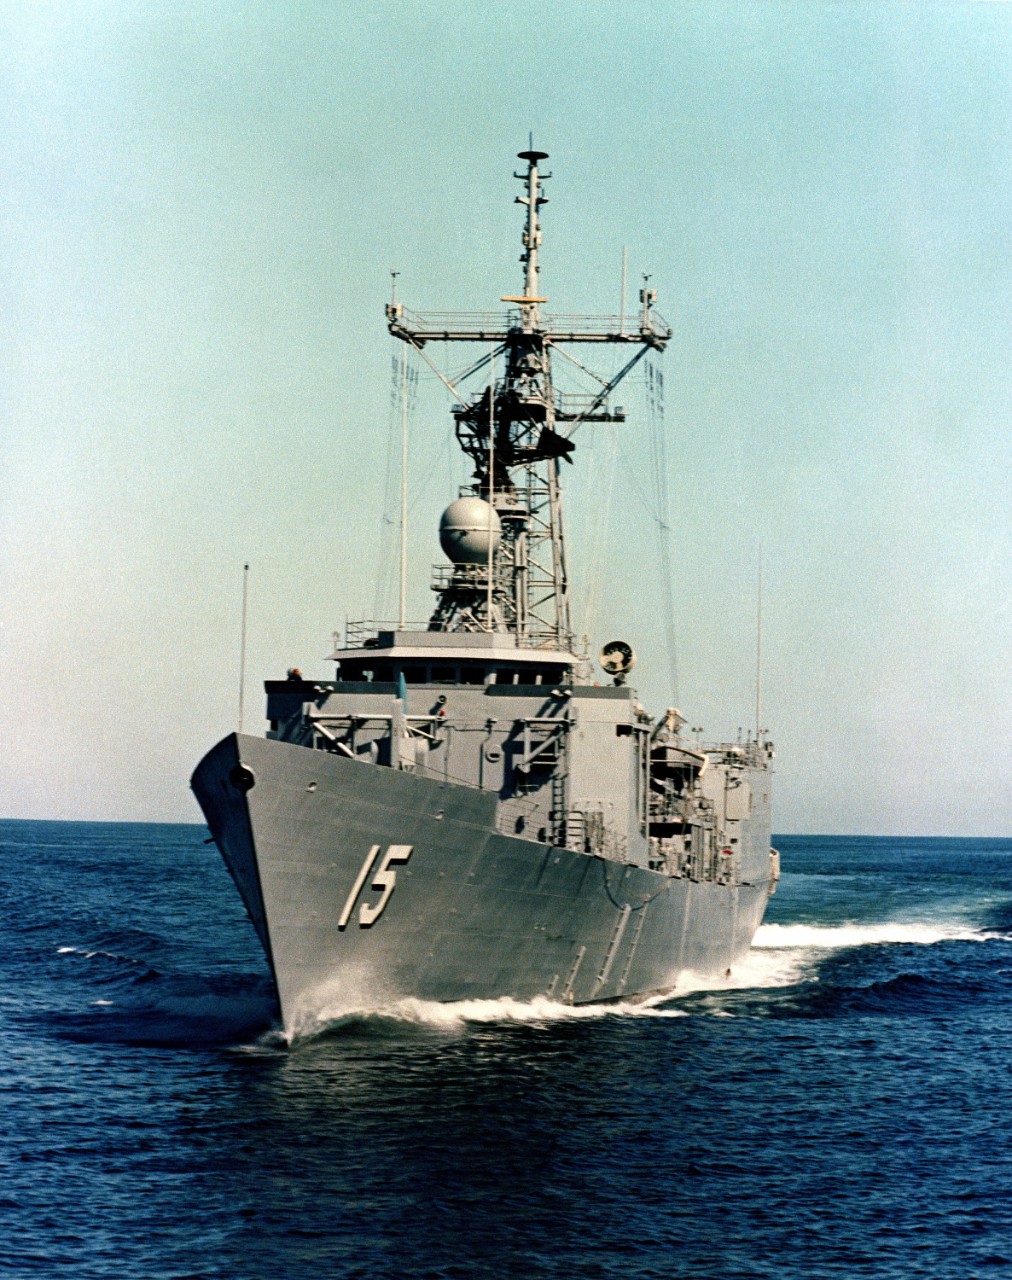 Estocin underway in the Atlantic during pre-commissioning sea trials, 8 September 1980. (U.S. Navy Photograph DN-SC-83-10710, Bath Iron Works Corp., National Archives and Records Administration, Still Pictures Division, College Park, Md.)